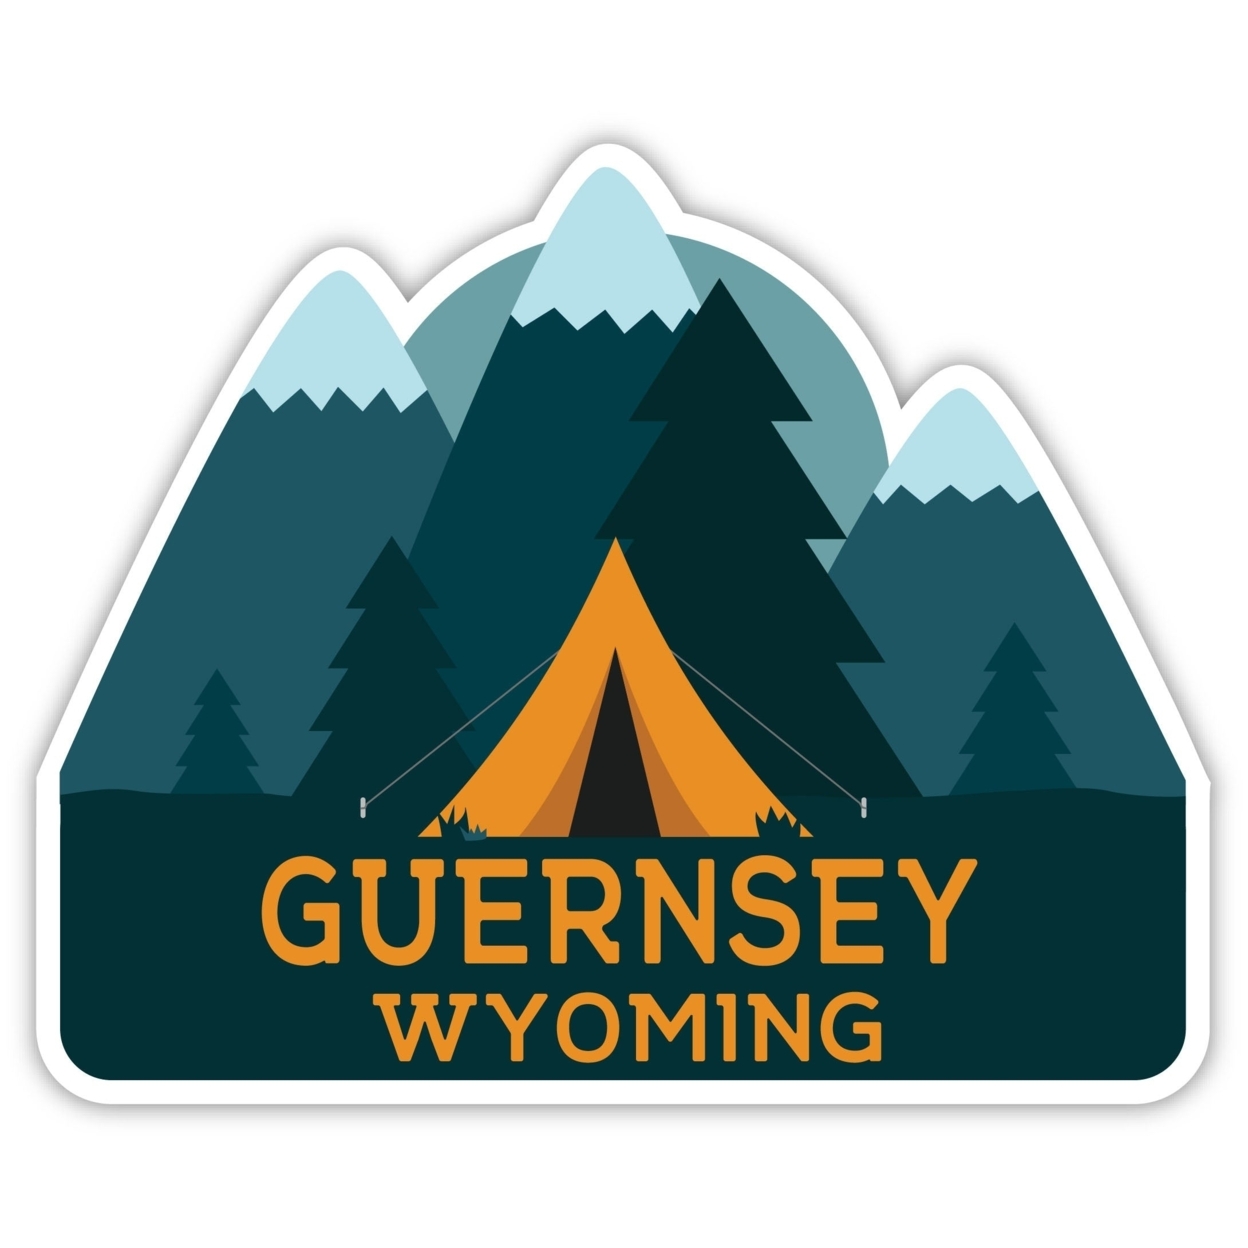 Guernsey Wyoming Souvenir Decorative Stickers (Choose Theme And Size) - 4-Pack, 12-Inch, Tent